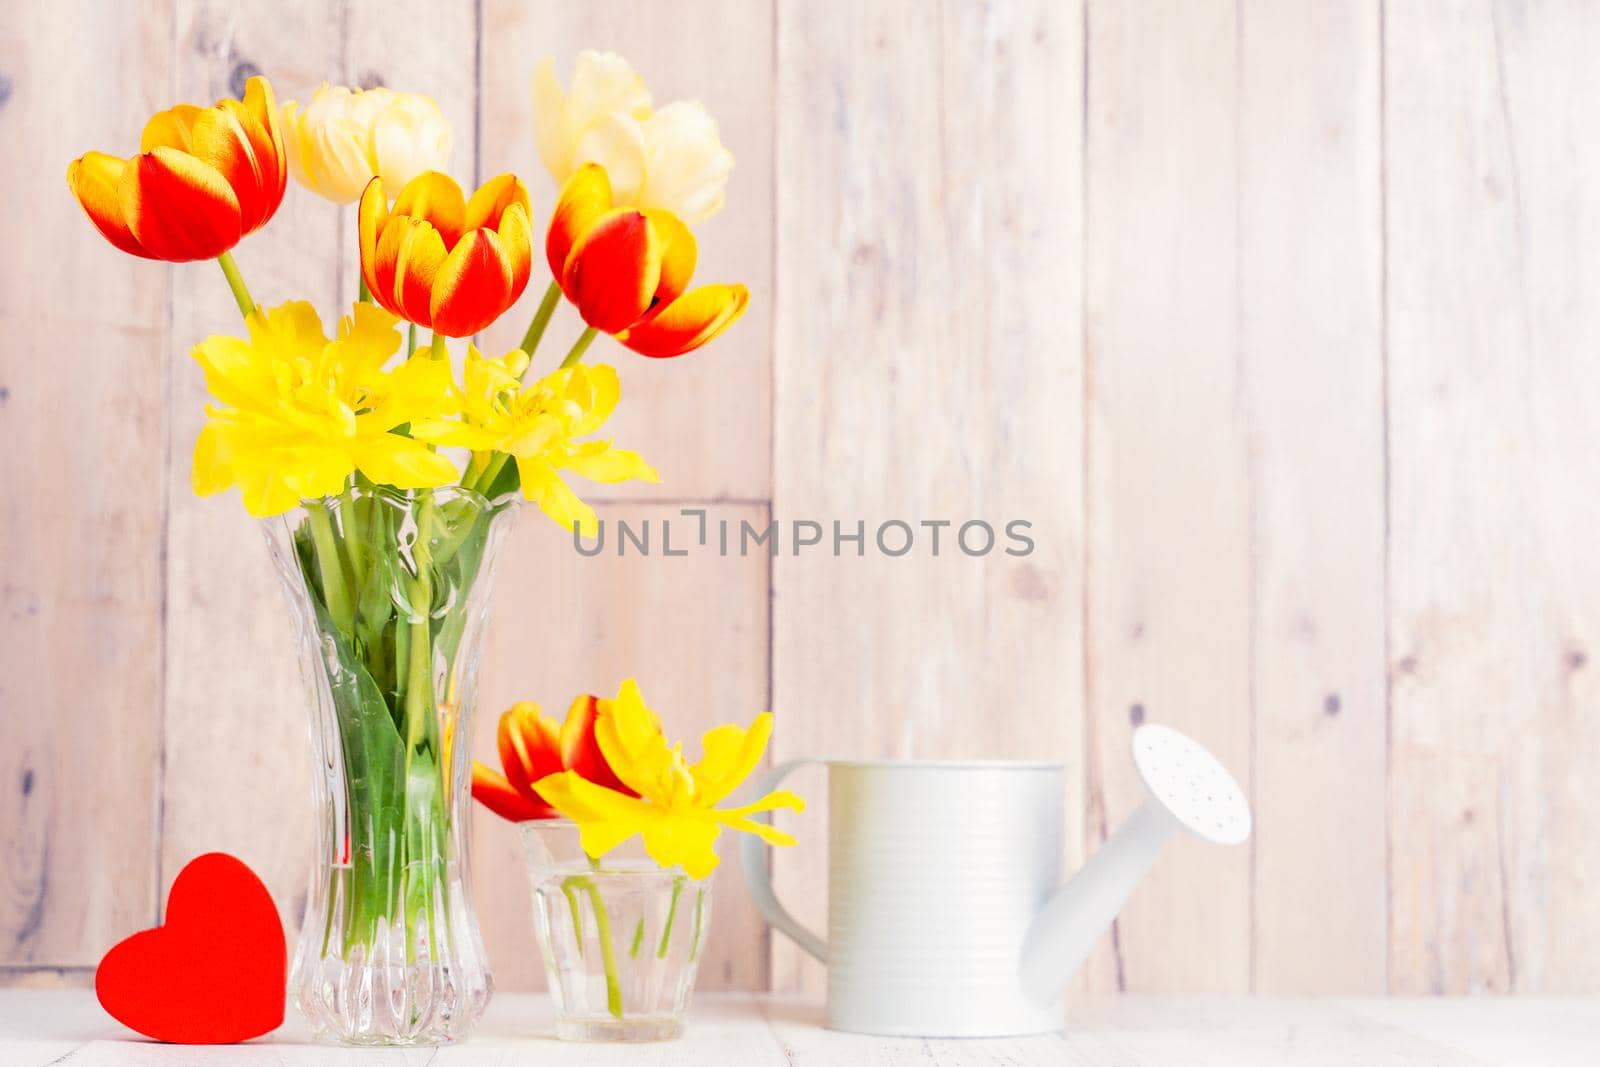 Tulip flower arrangement in glass vase with heart greeting, watering can decor on wooden table background wall, close up, Mother's Day design concept.